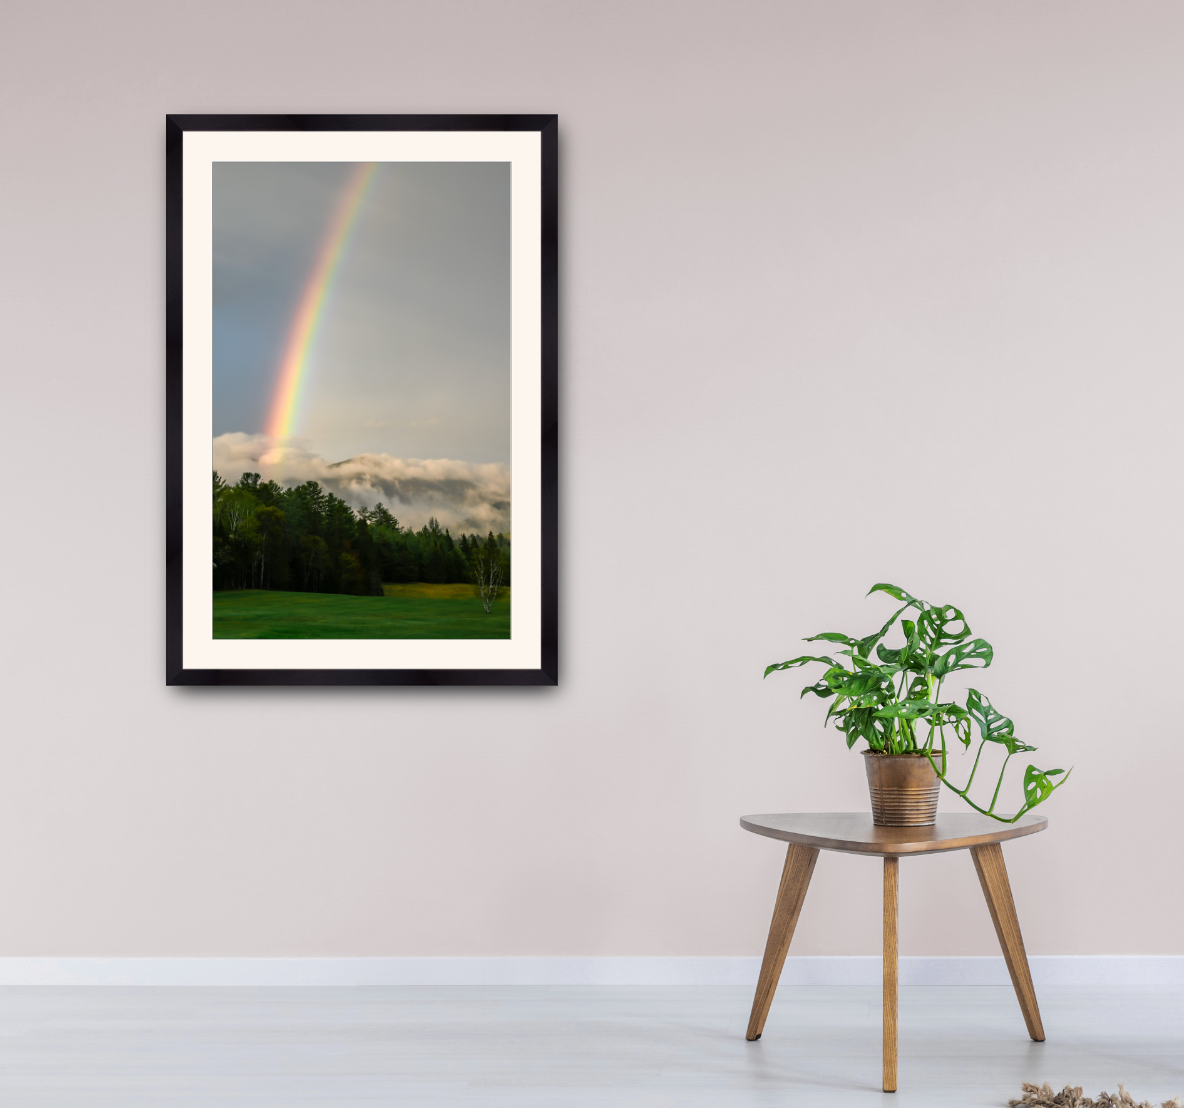 print of a rainbow over the adirondack mountains